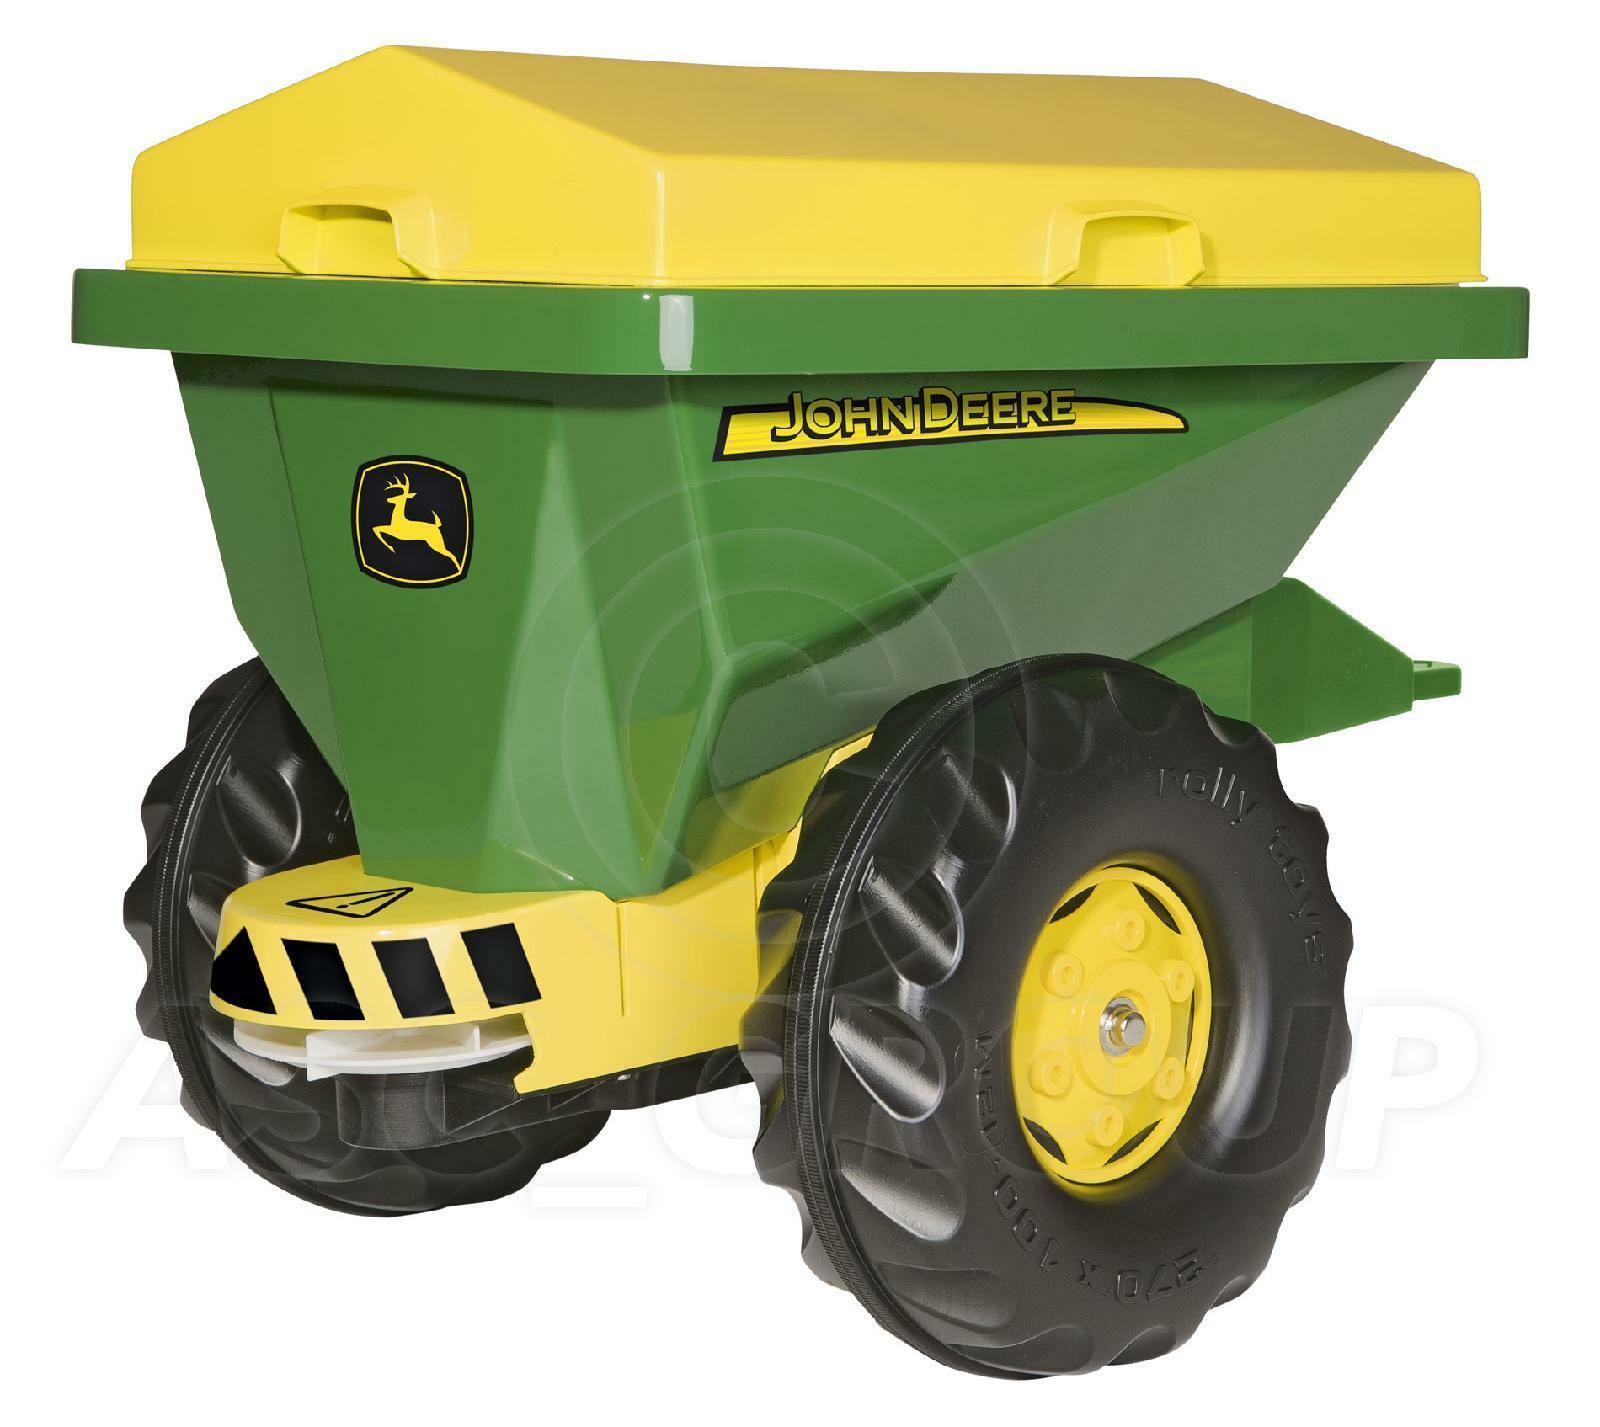 Picture of John Deere 125111 Seed Spreader - Green & Yellow